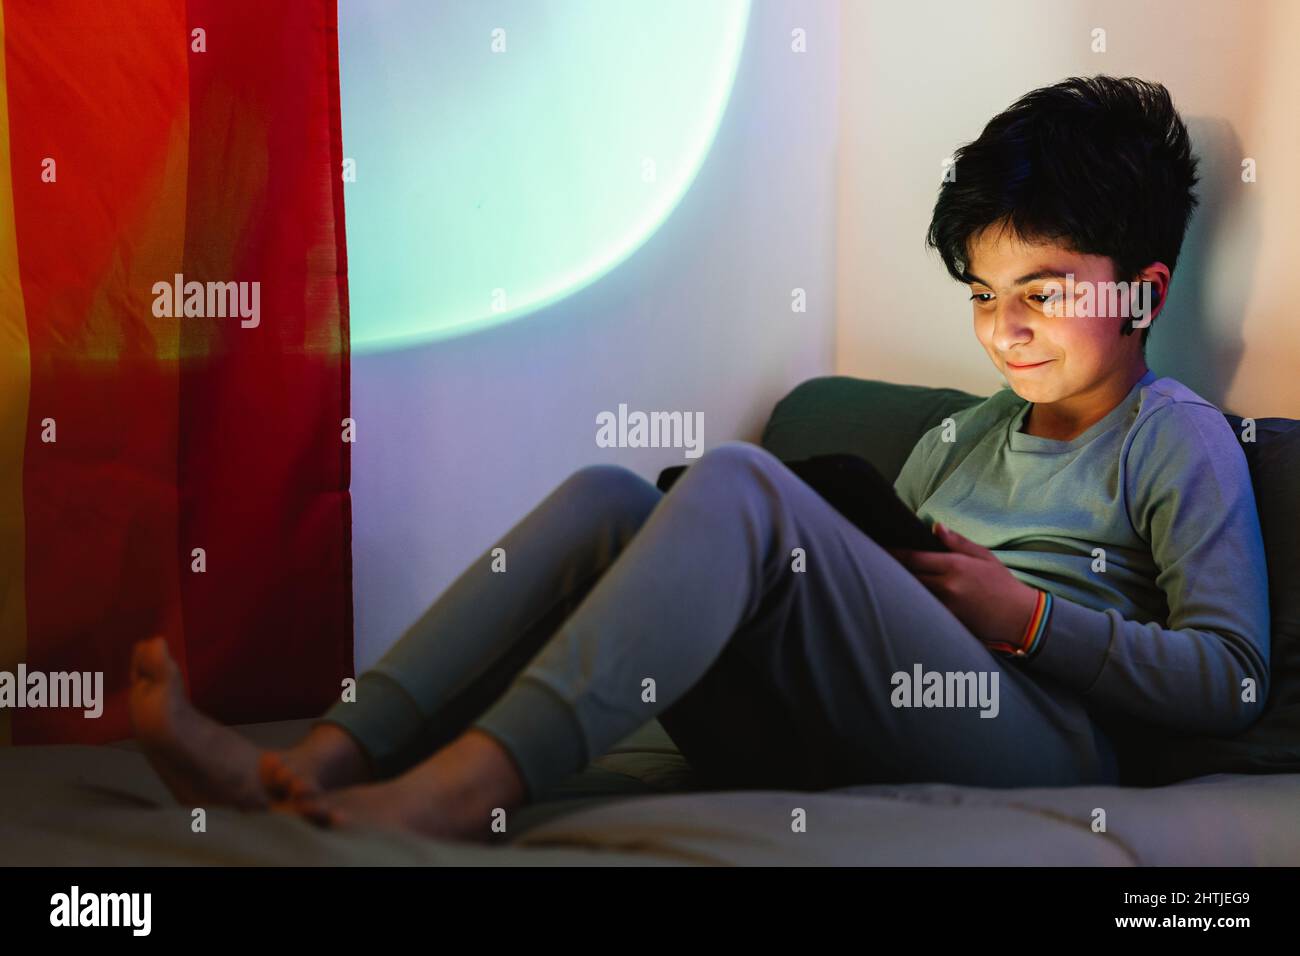 Arab happy teen boy with rainbow bracelet on wrist wearing pajama with wireless earphones while sitting on bed and using tablet Stock Photo